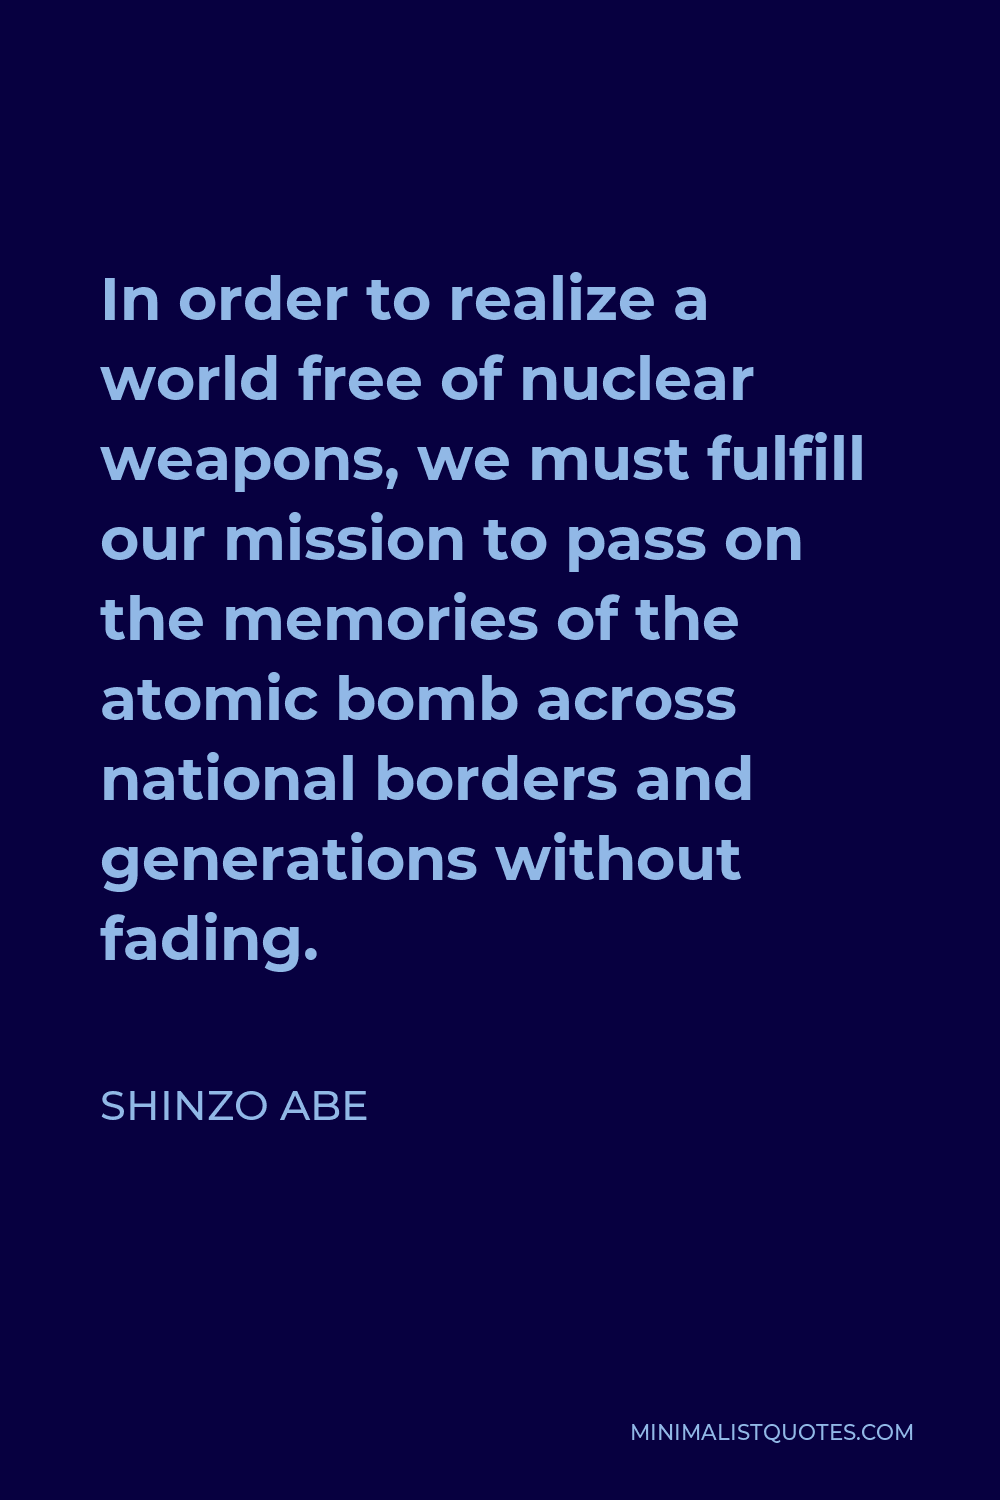 Shinzo Abe Quote - In order to realize a world free of nuclear weapons, we must fulfill our mission to pass on the memories of the atomic bomb across national borders and generations without fading.